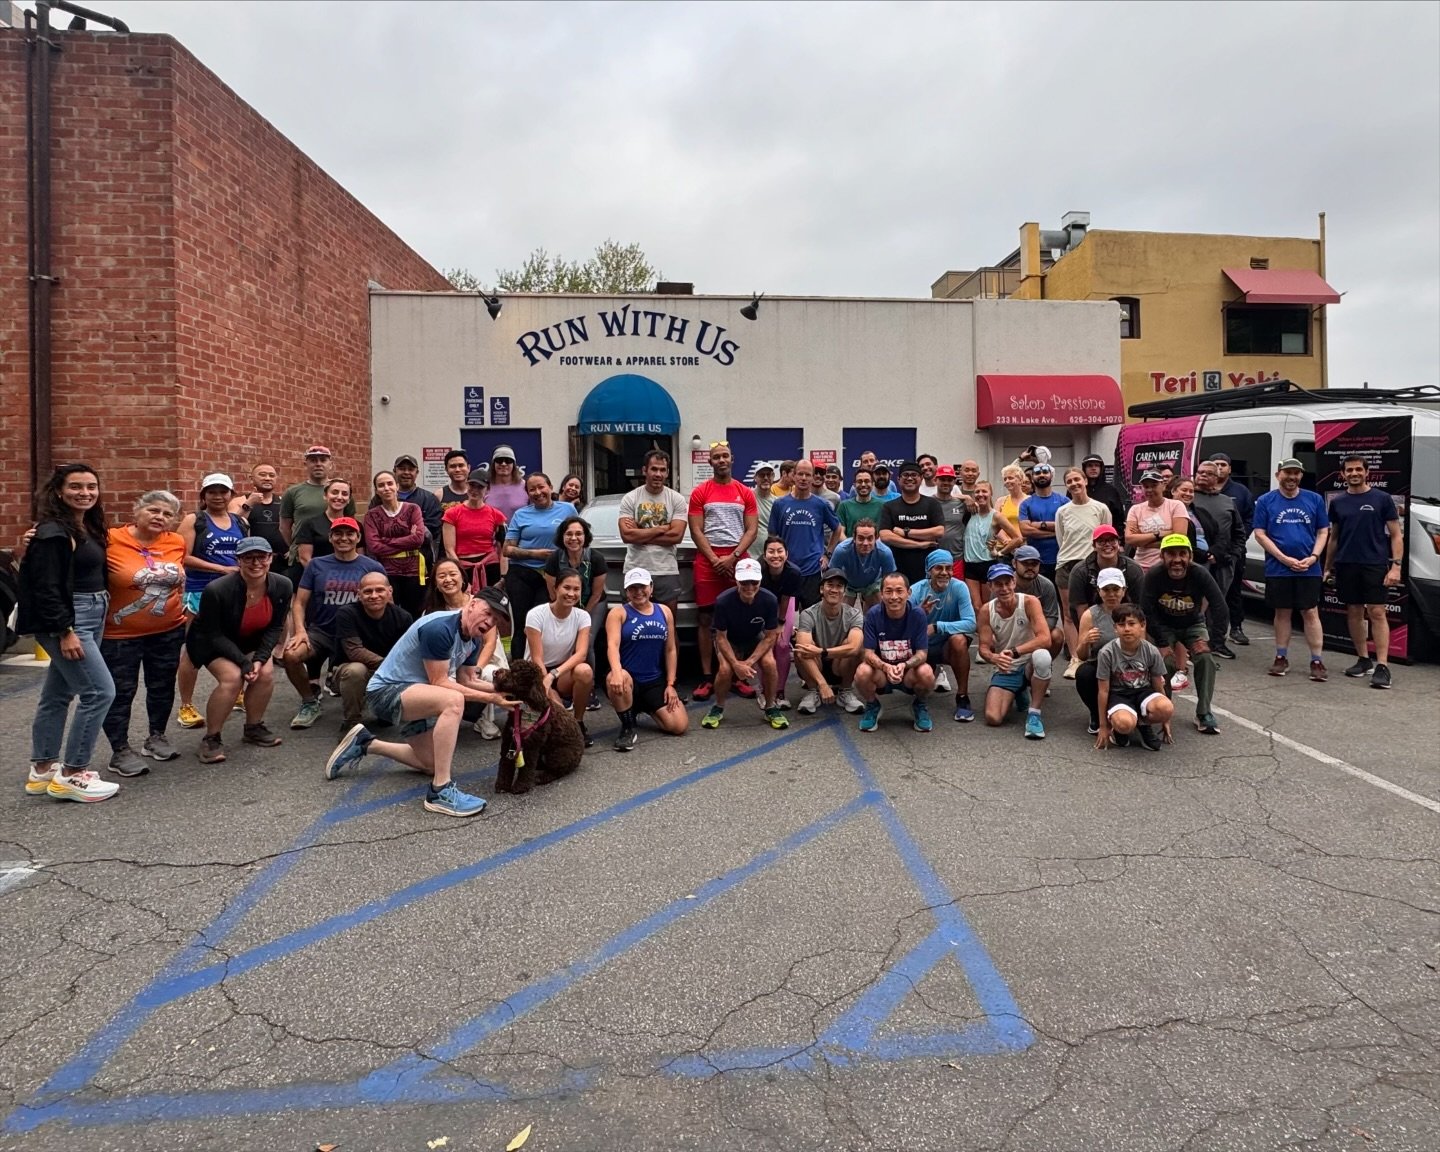 Memorial Day Fun Run | We hope you had a great weekend and enjoying Memorial Day!! We are still having our weekly Monday Fun Run and it&rsquo;s looking like a beautiful day to get in some miles. Grab a friend and join us tonight for a nice and chill 